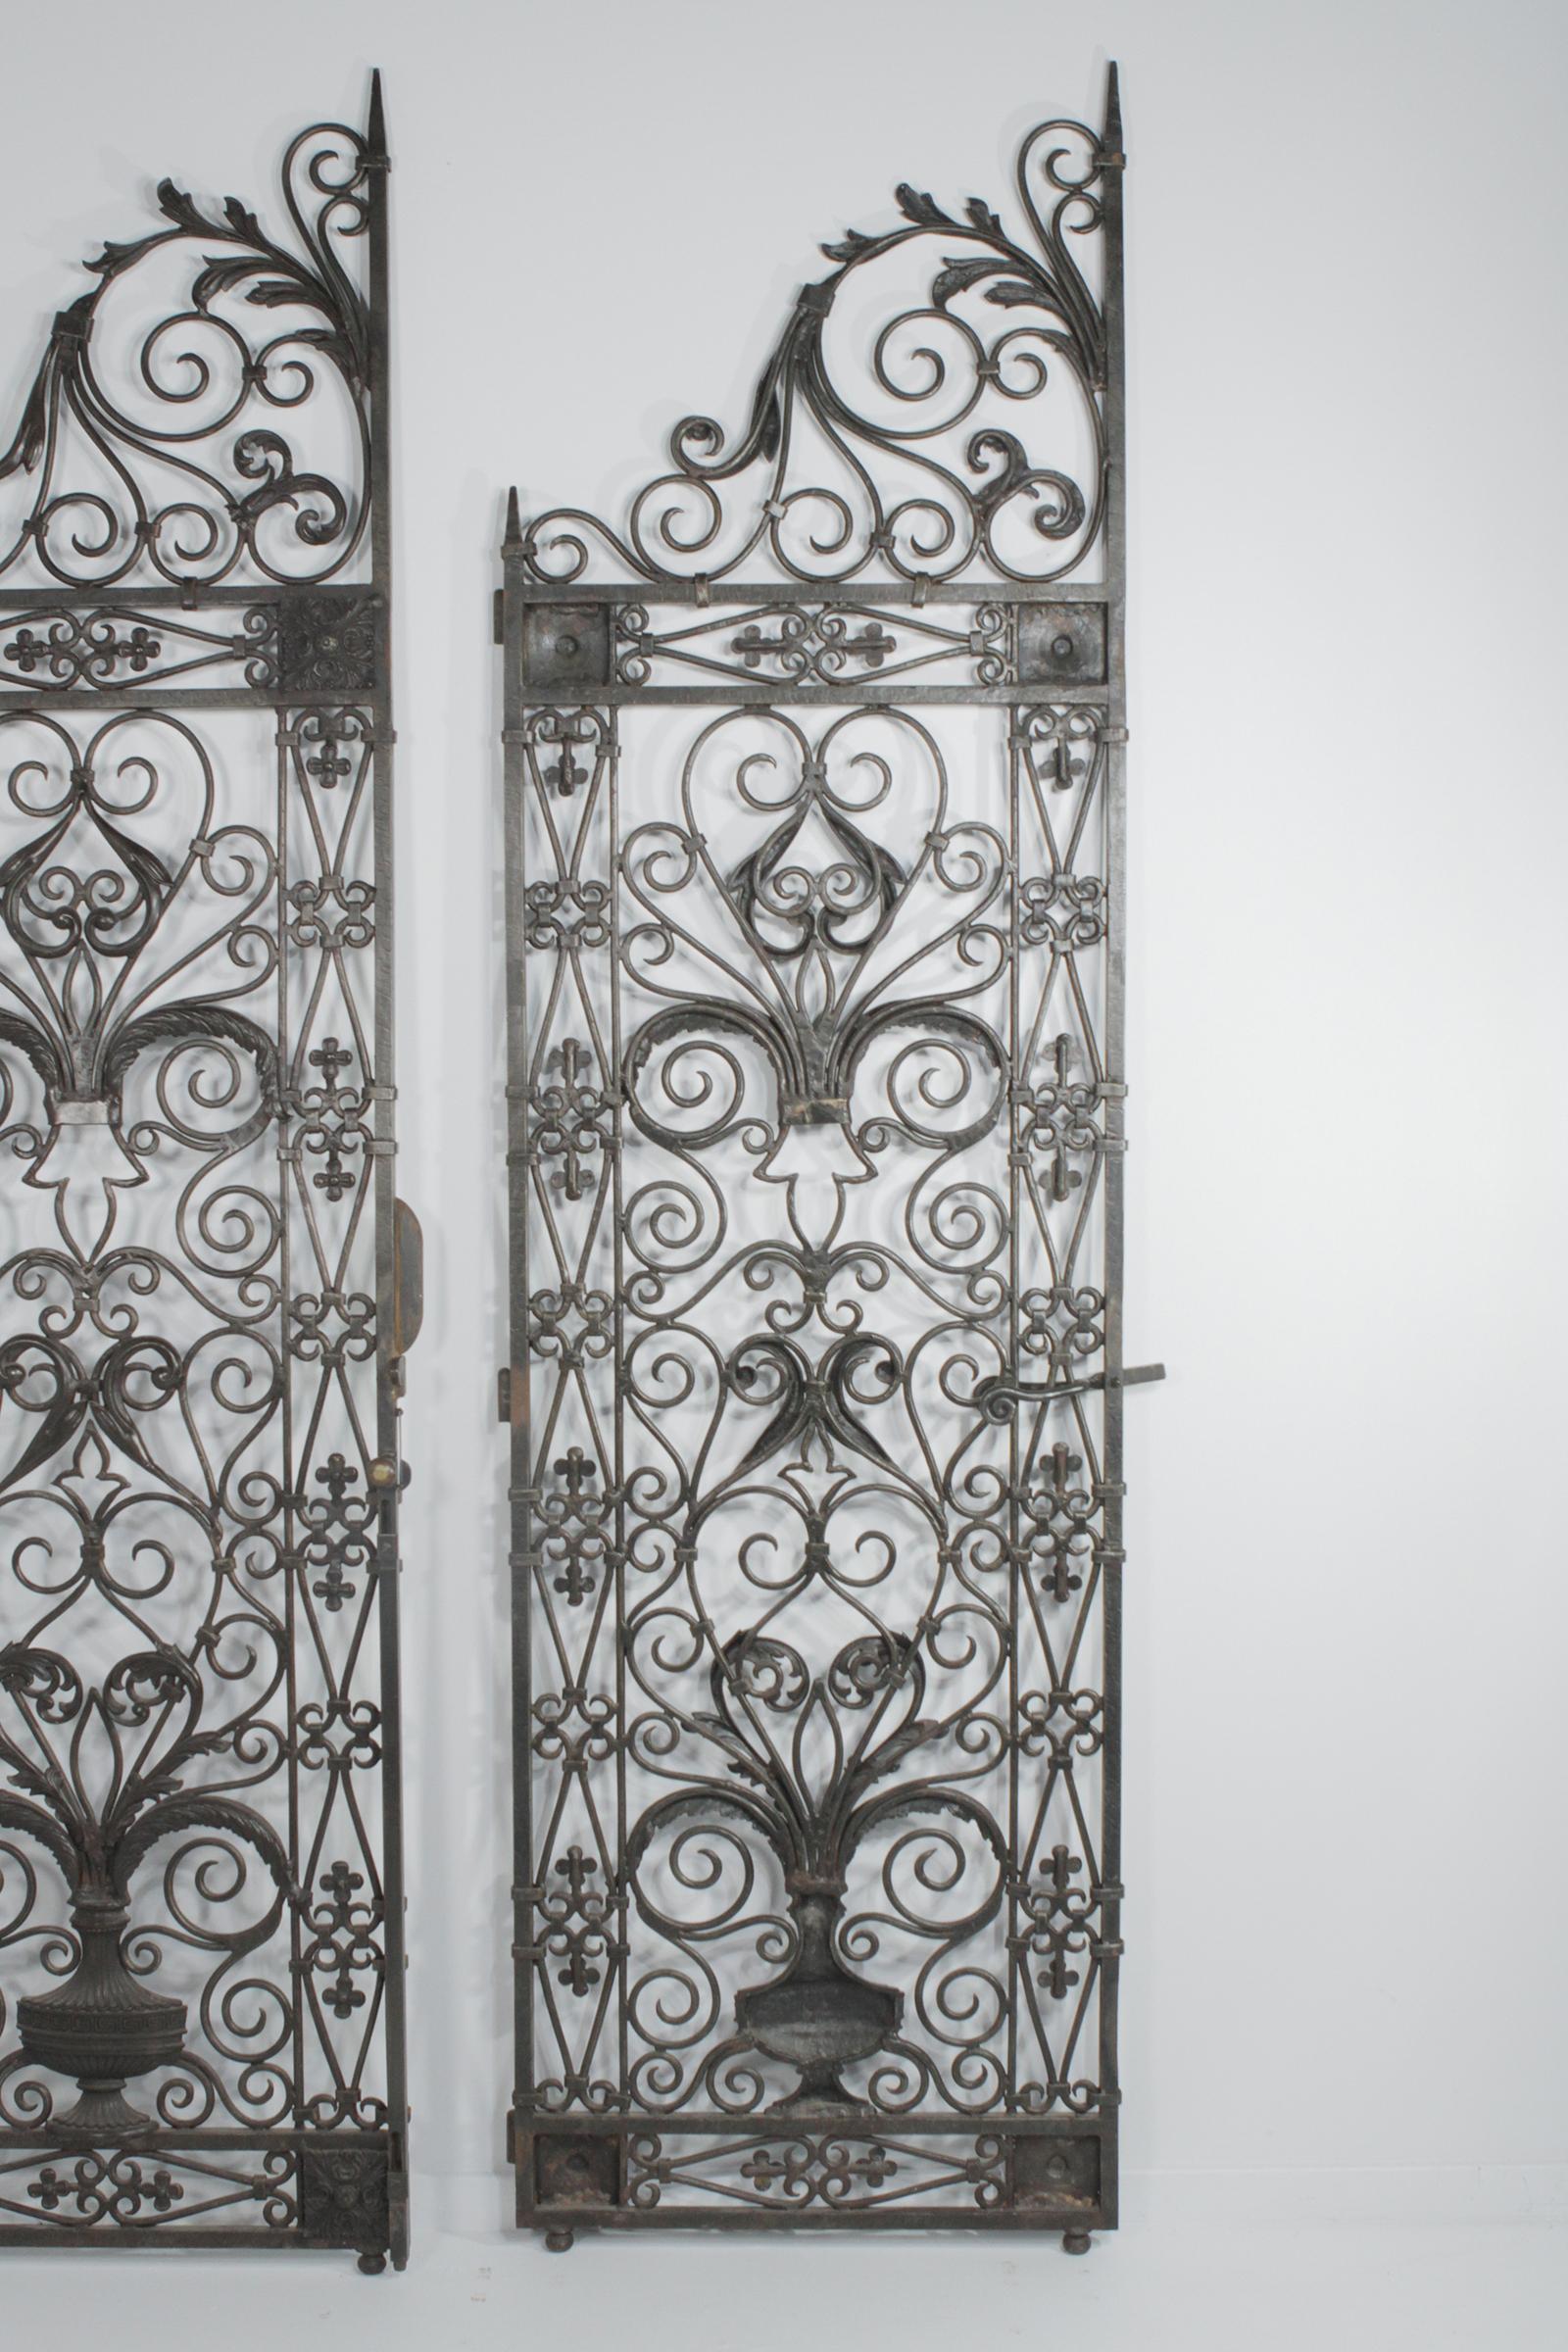 Gorgeous ornate very impressive large European handwrought iron gates having two panels with ornate curlicues in a gun metal color with brass accents. Great as room dividers or architectural doors.
Original hardware for mounting